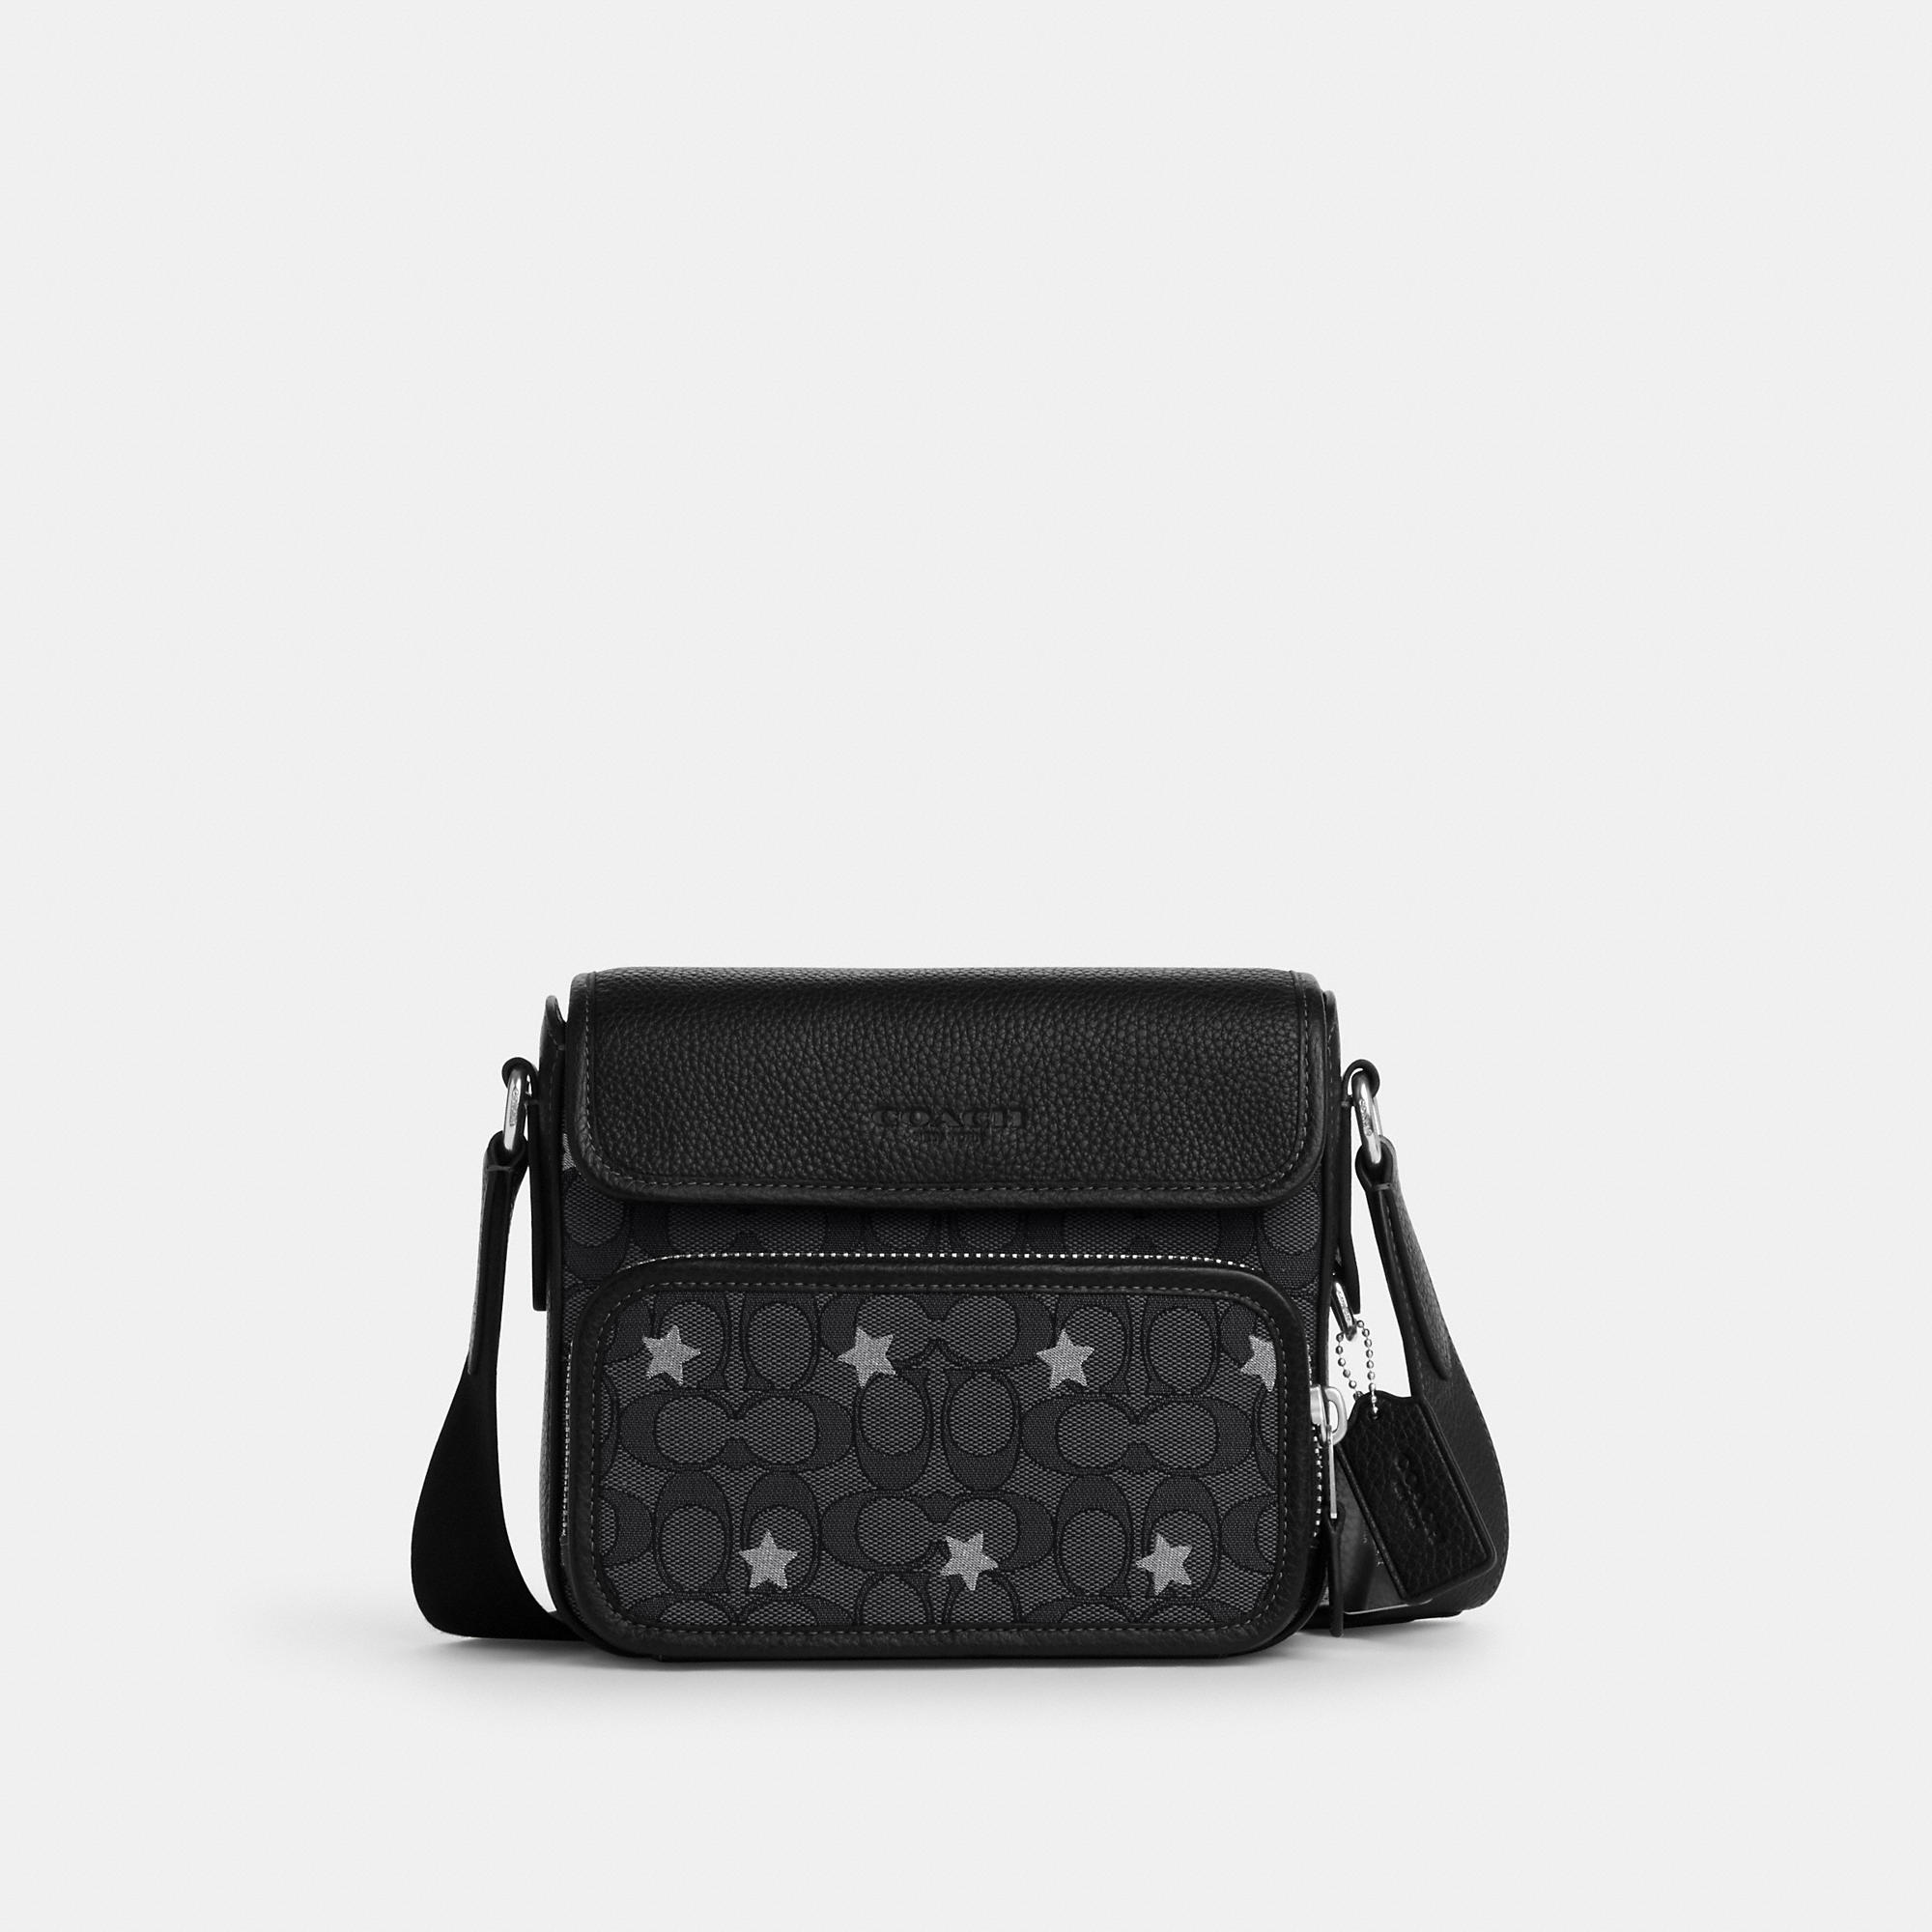 Coach Outlet Sullivan Flap Crossbody In Signature Jacquard With Star ...